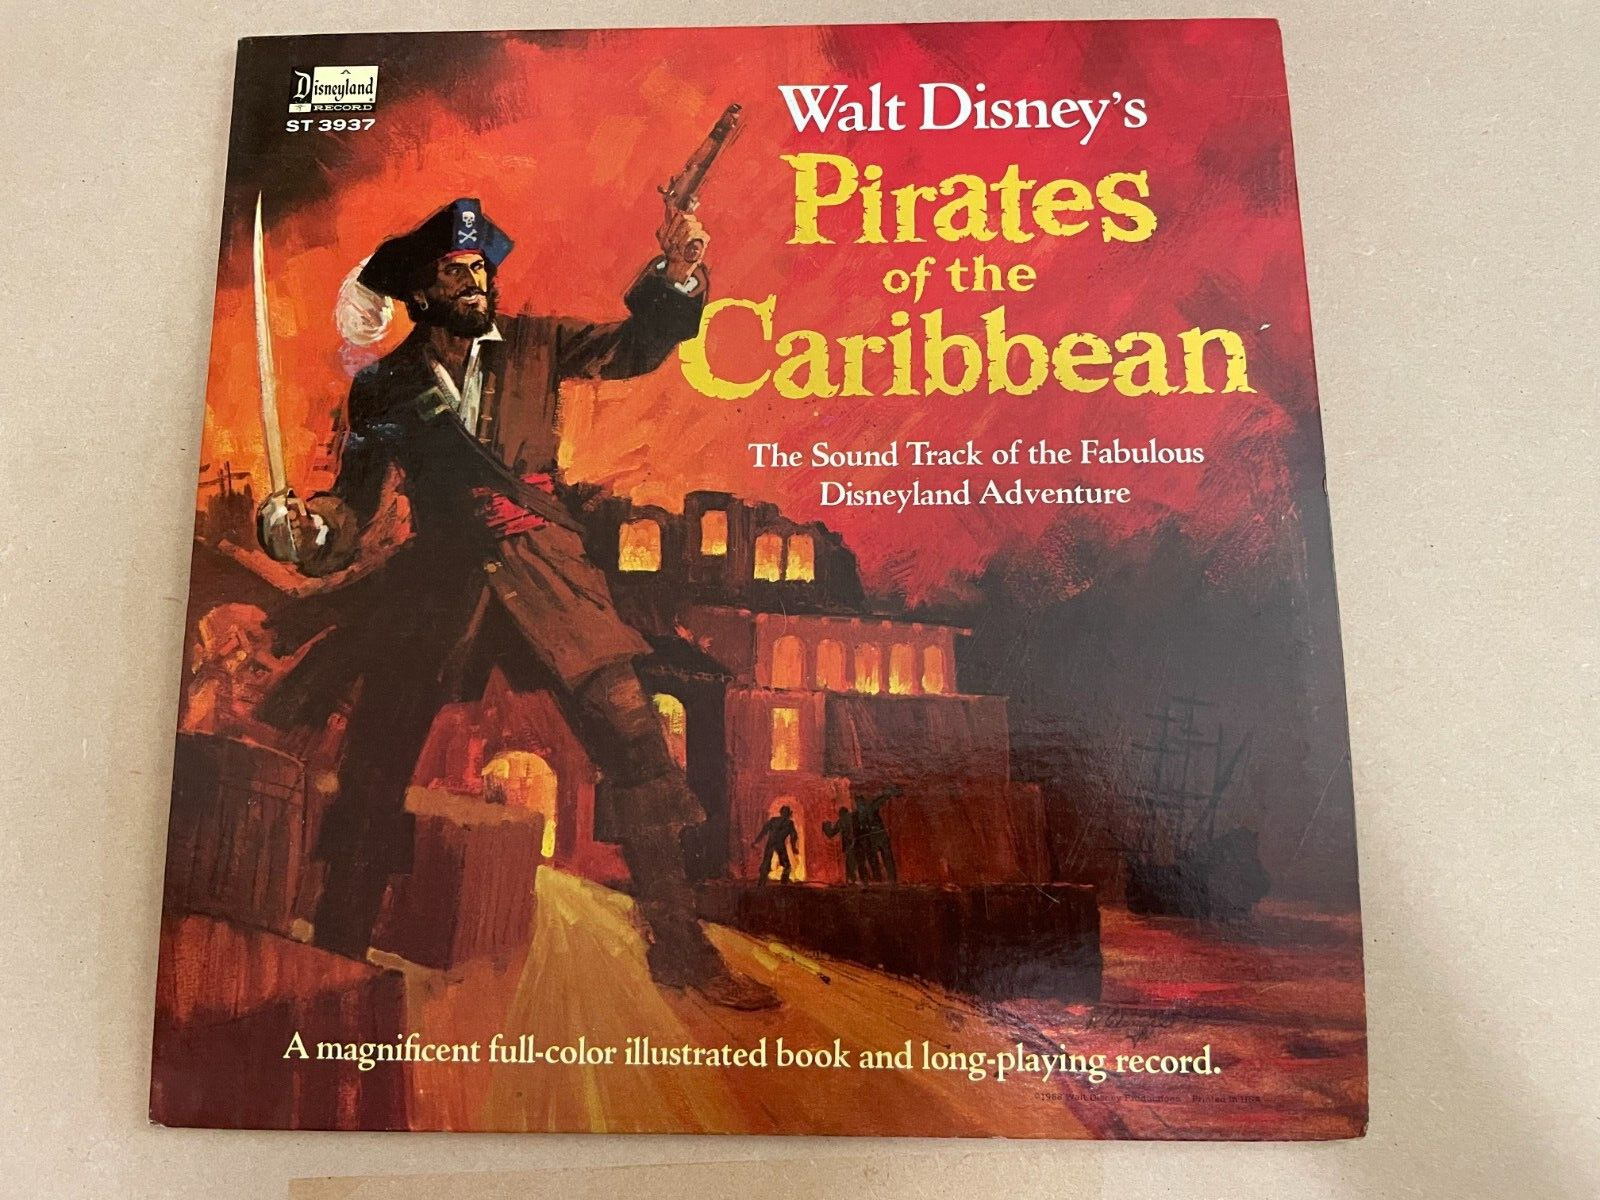 Disney's 'Pirates of the Caribbean' 1968 Disneyland Record with Book